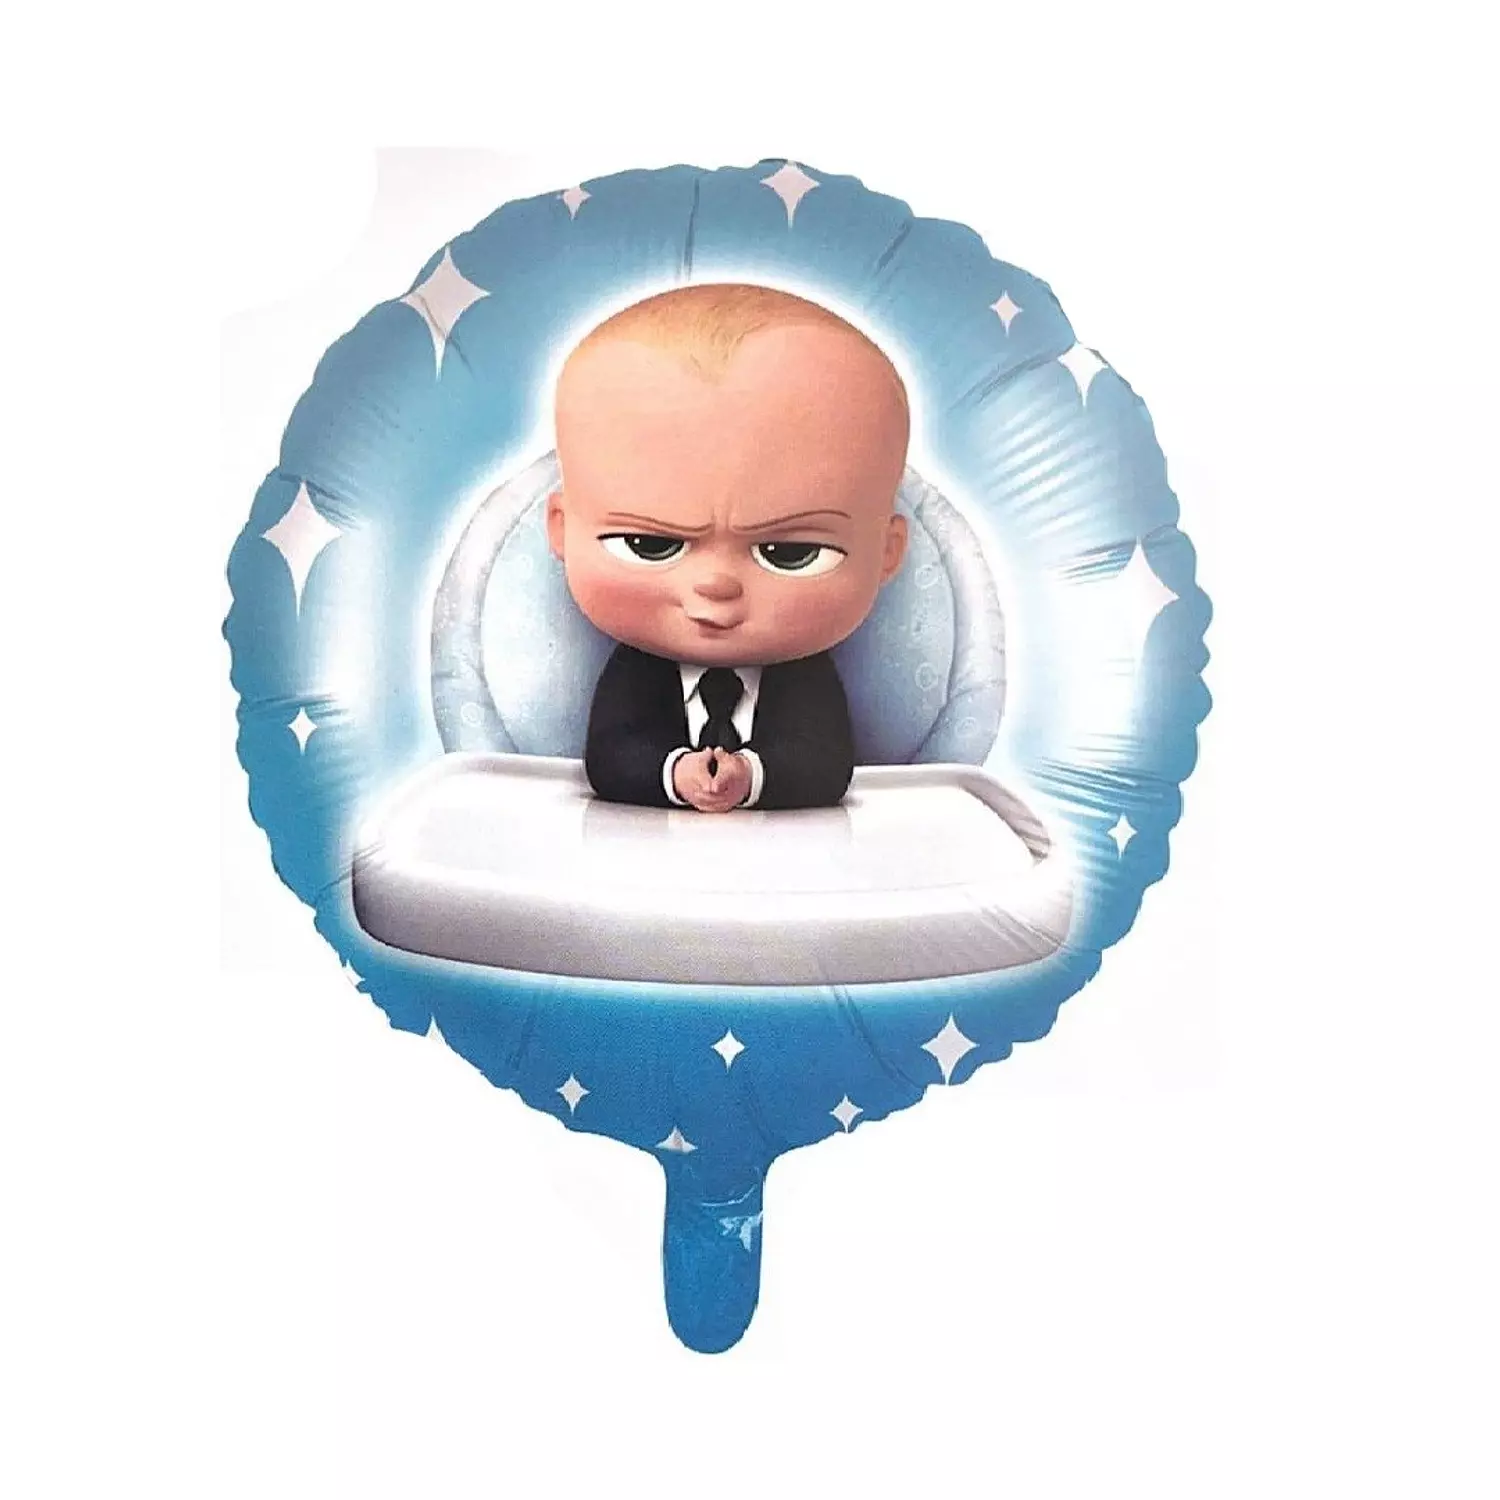 Boss Baby Round Balloon hover image